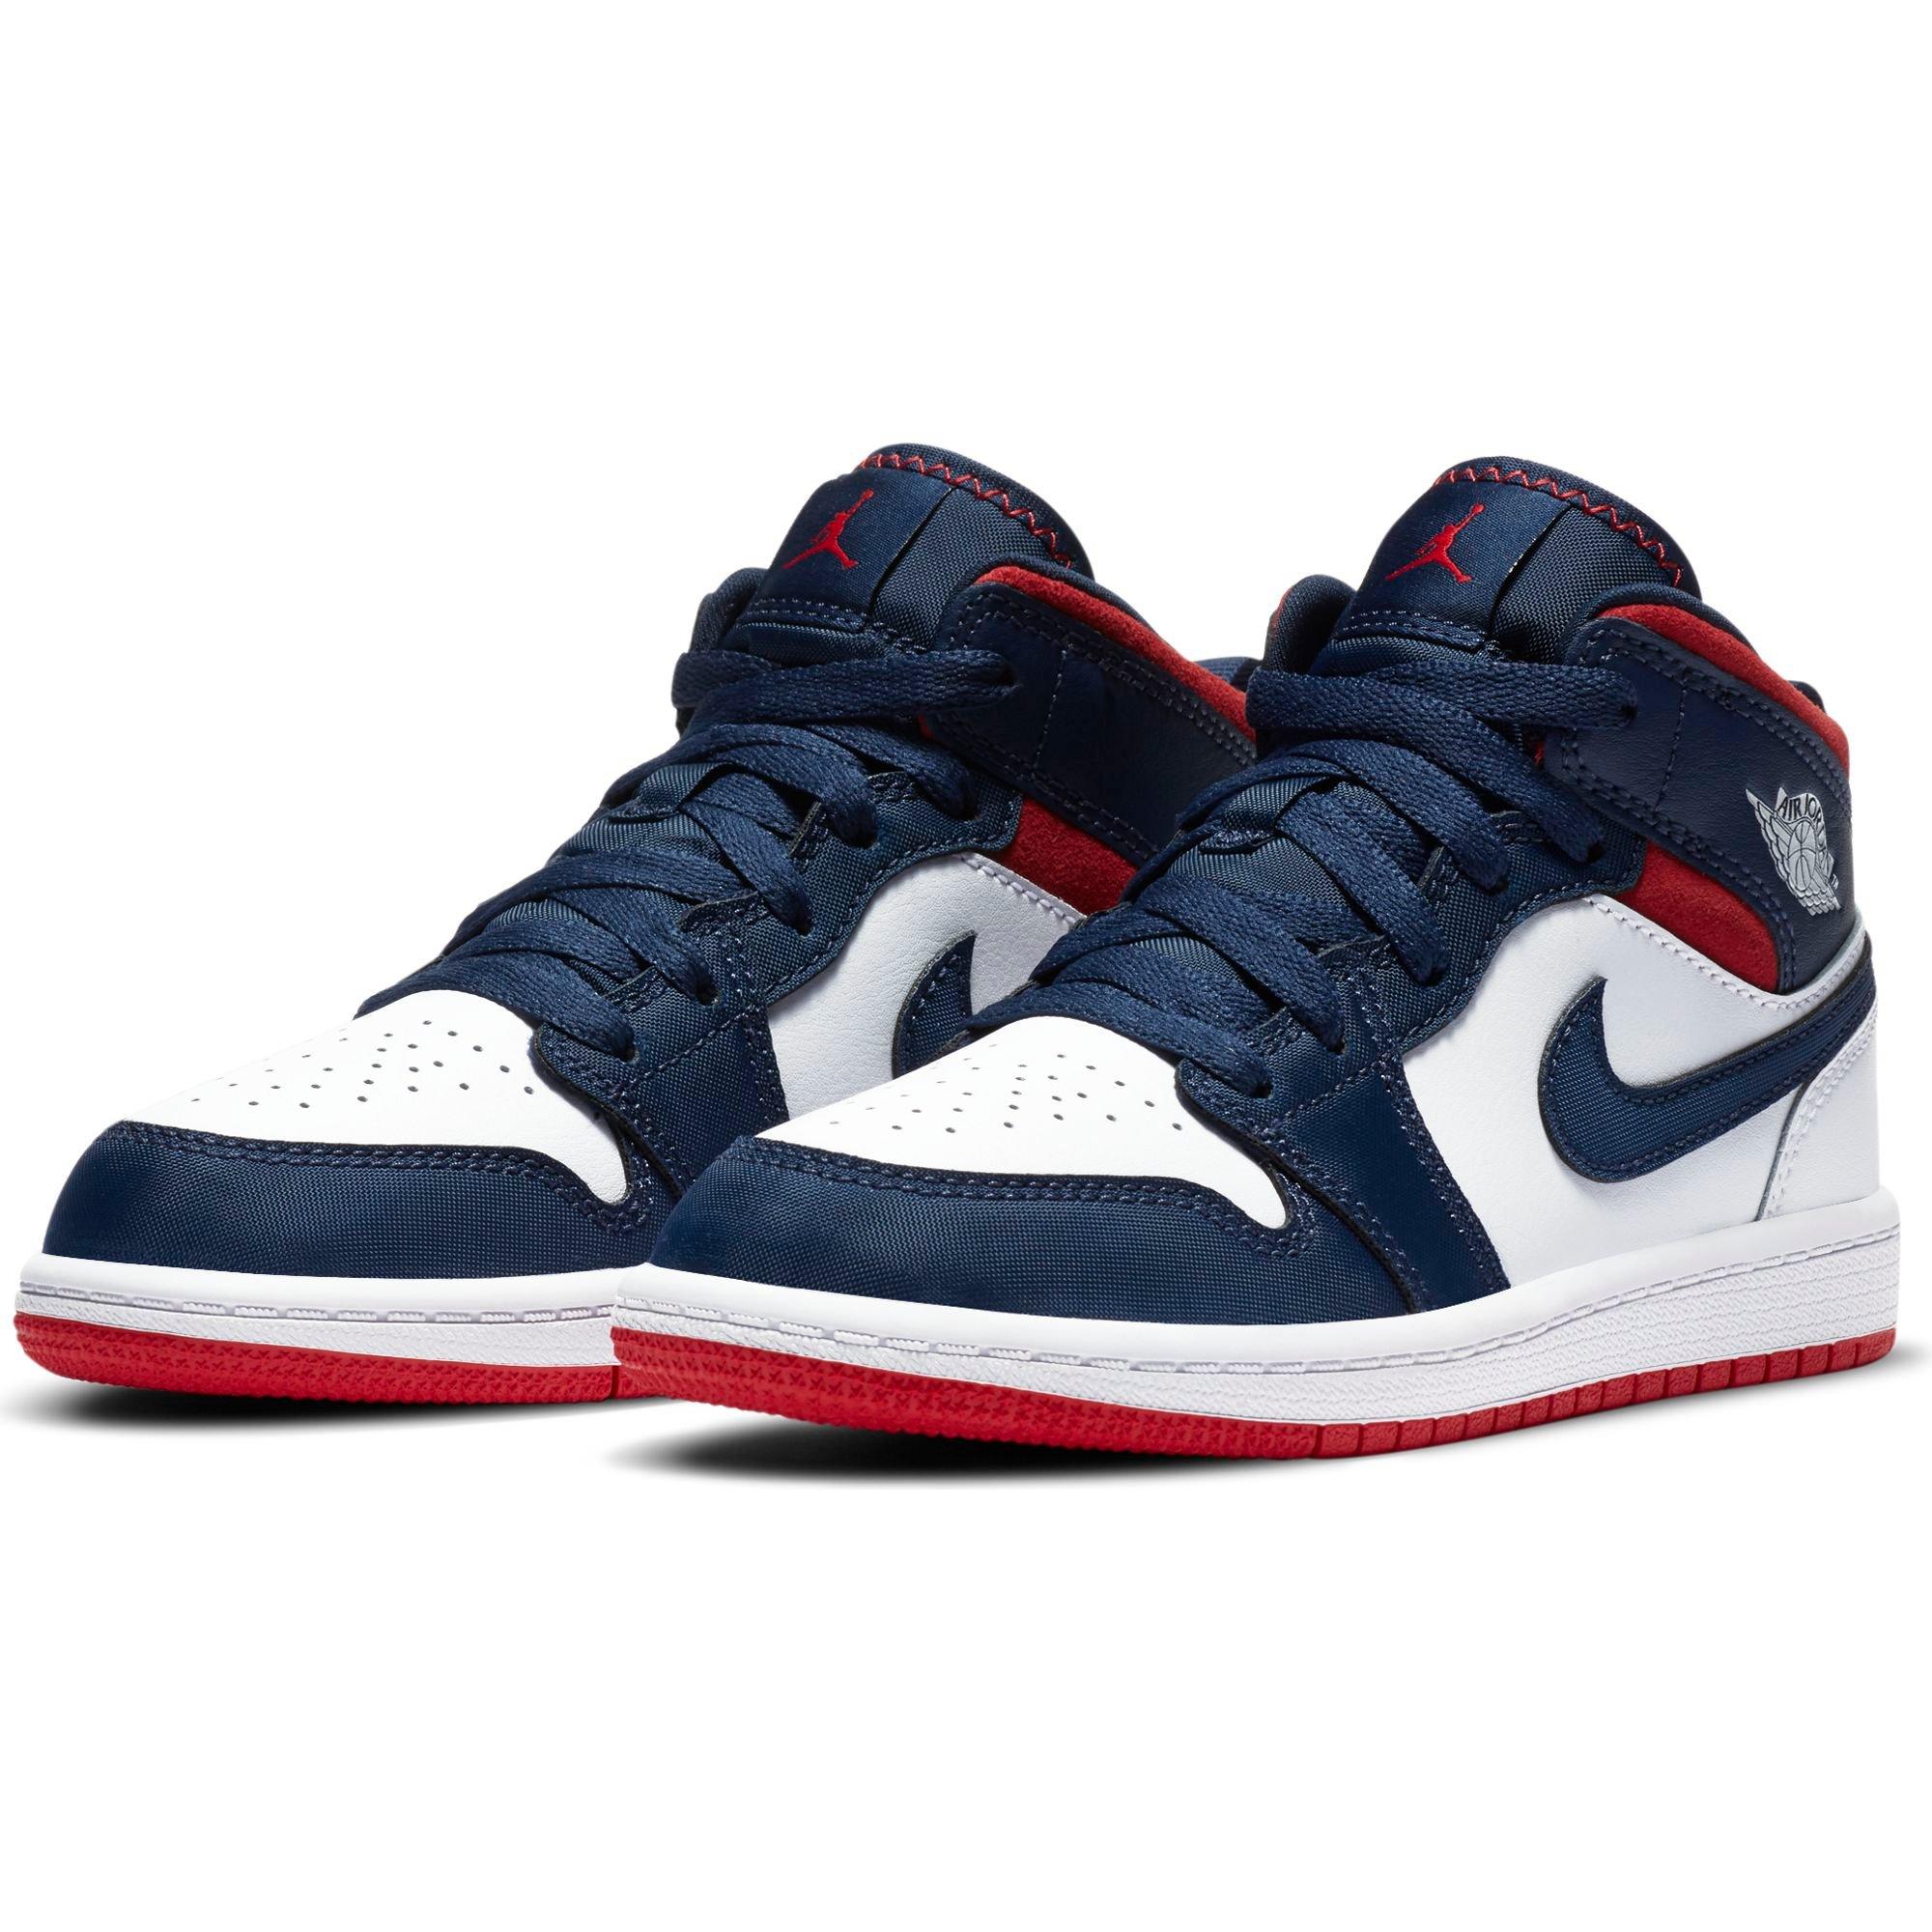 jordan 1 red and navy blue